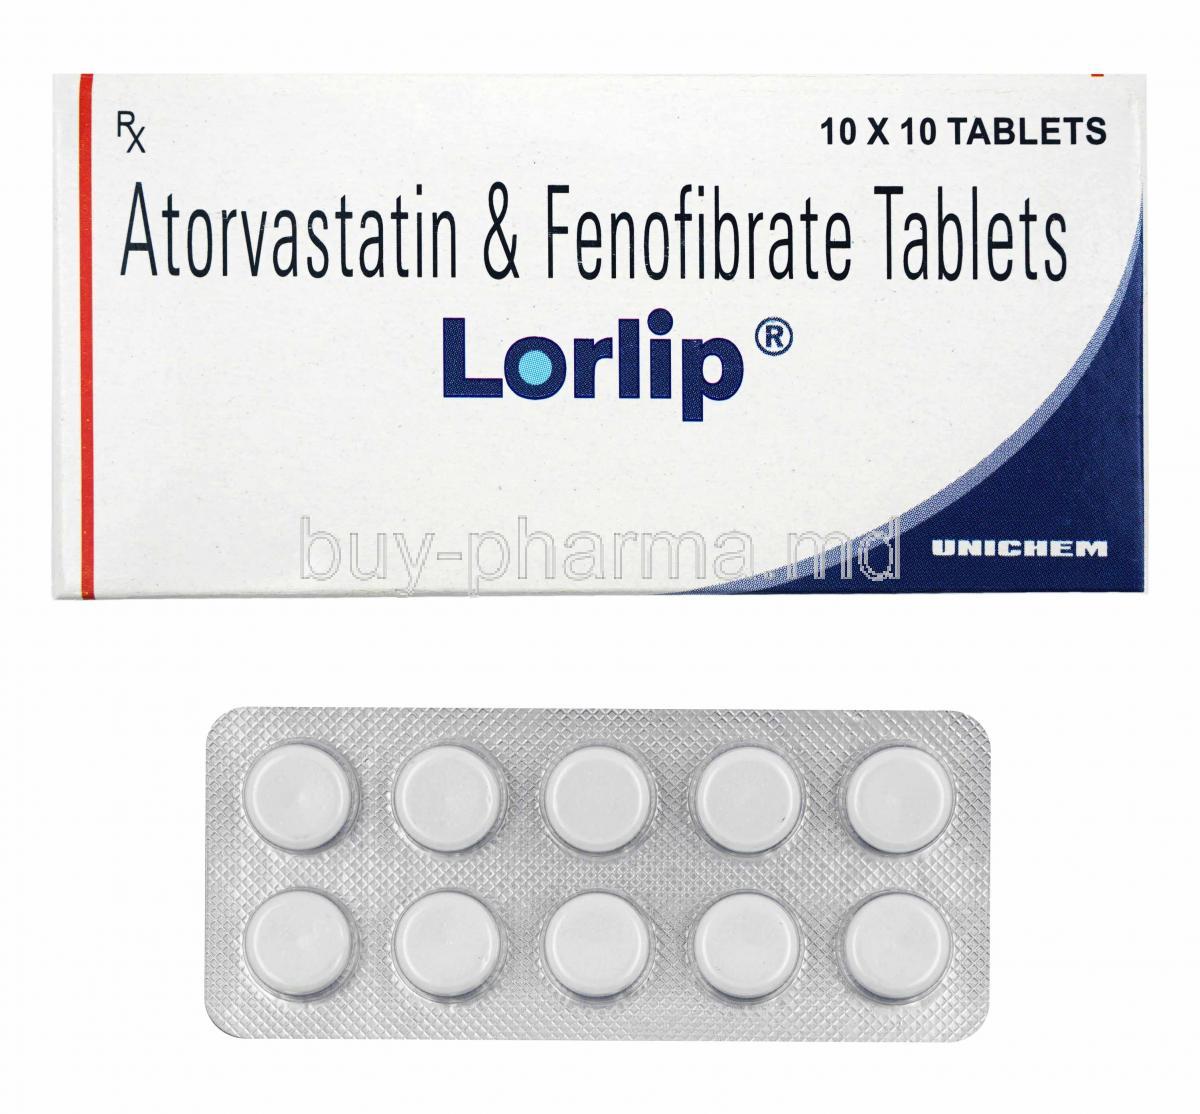 Lorlip, Atorvastatin and Fenofibrate box and tablets